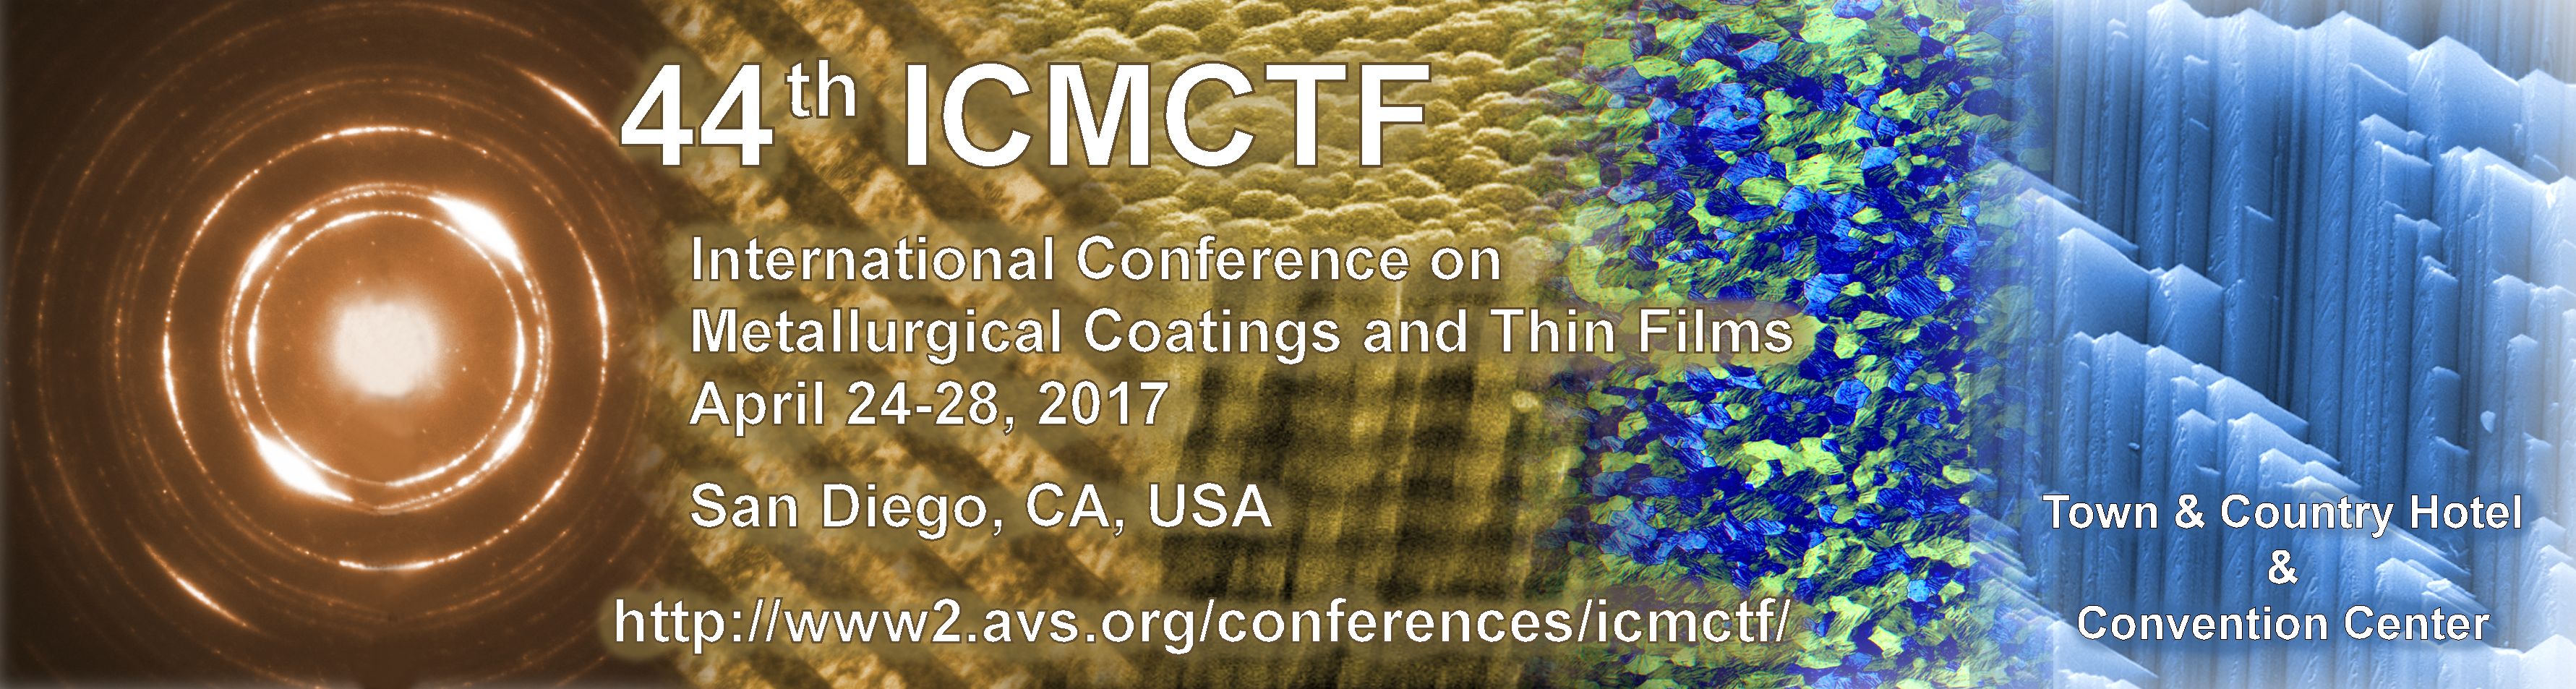 44th Int. Conf. on Metallurgical Coatings and Thin Films